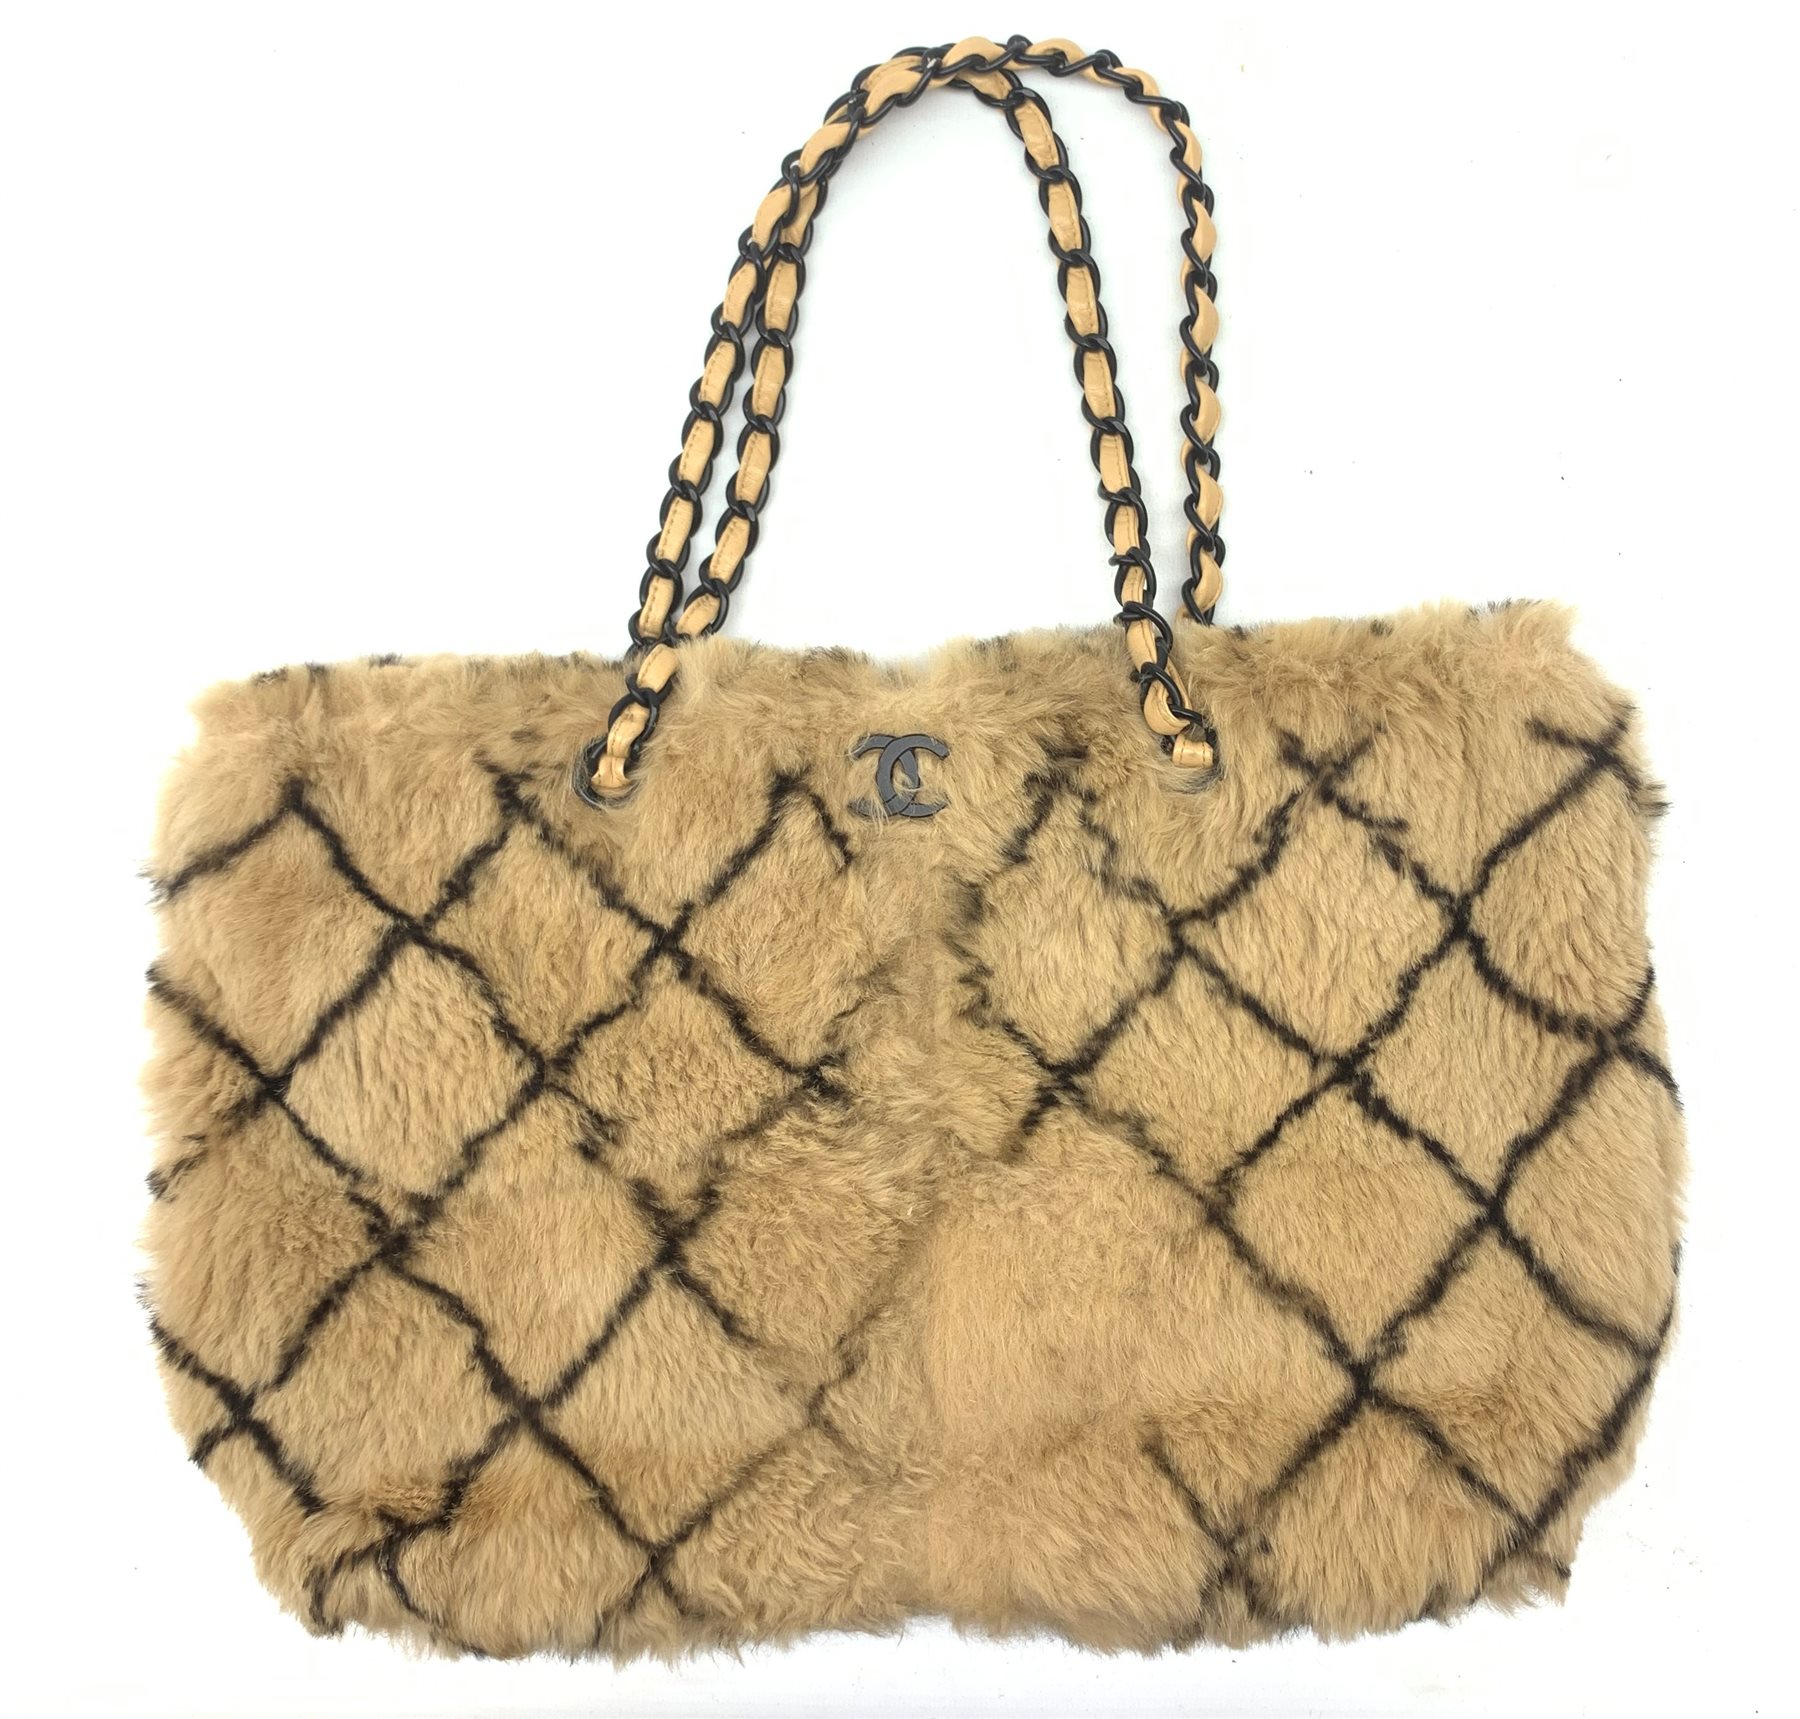 A Chanel 2001 rabbit fur tote bag, with diamond design and beige